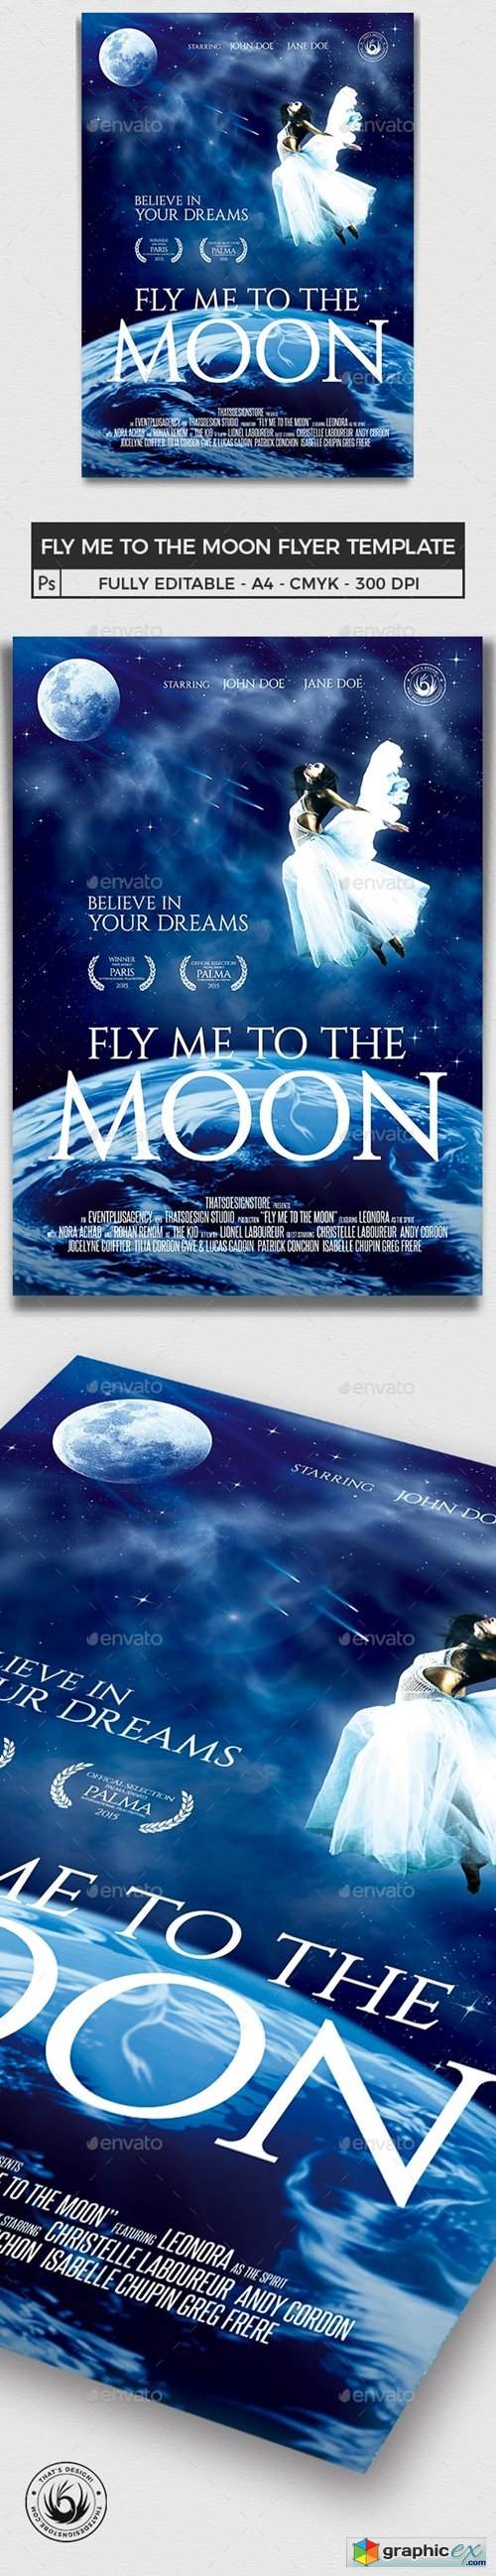 Fly Me to the Moon Movie Poster Template